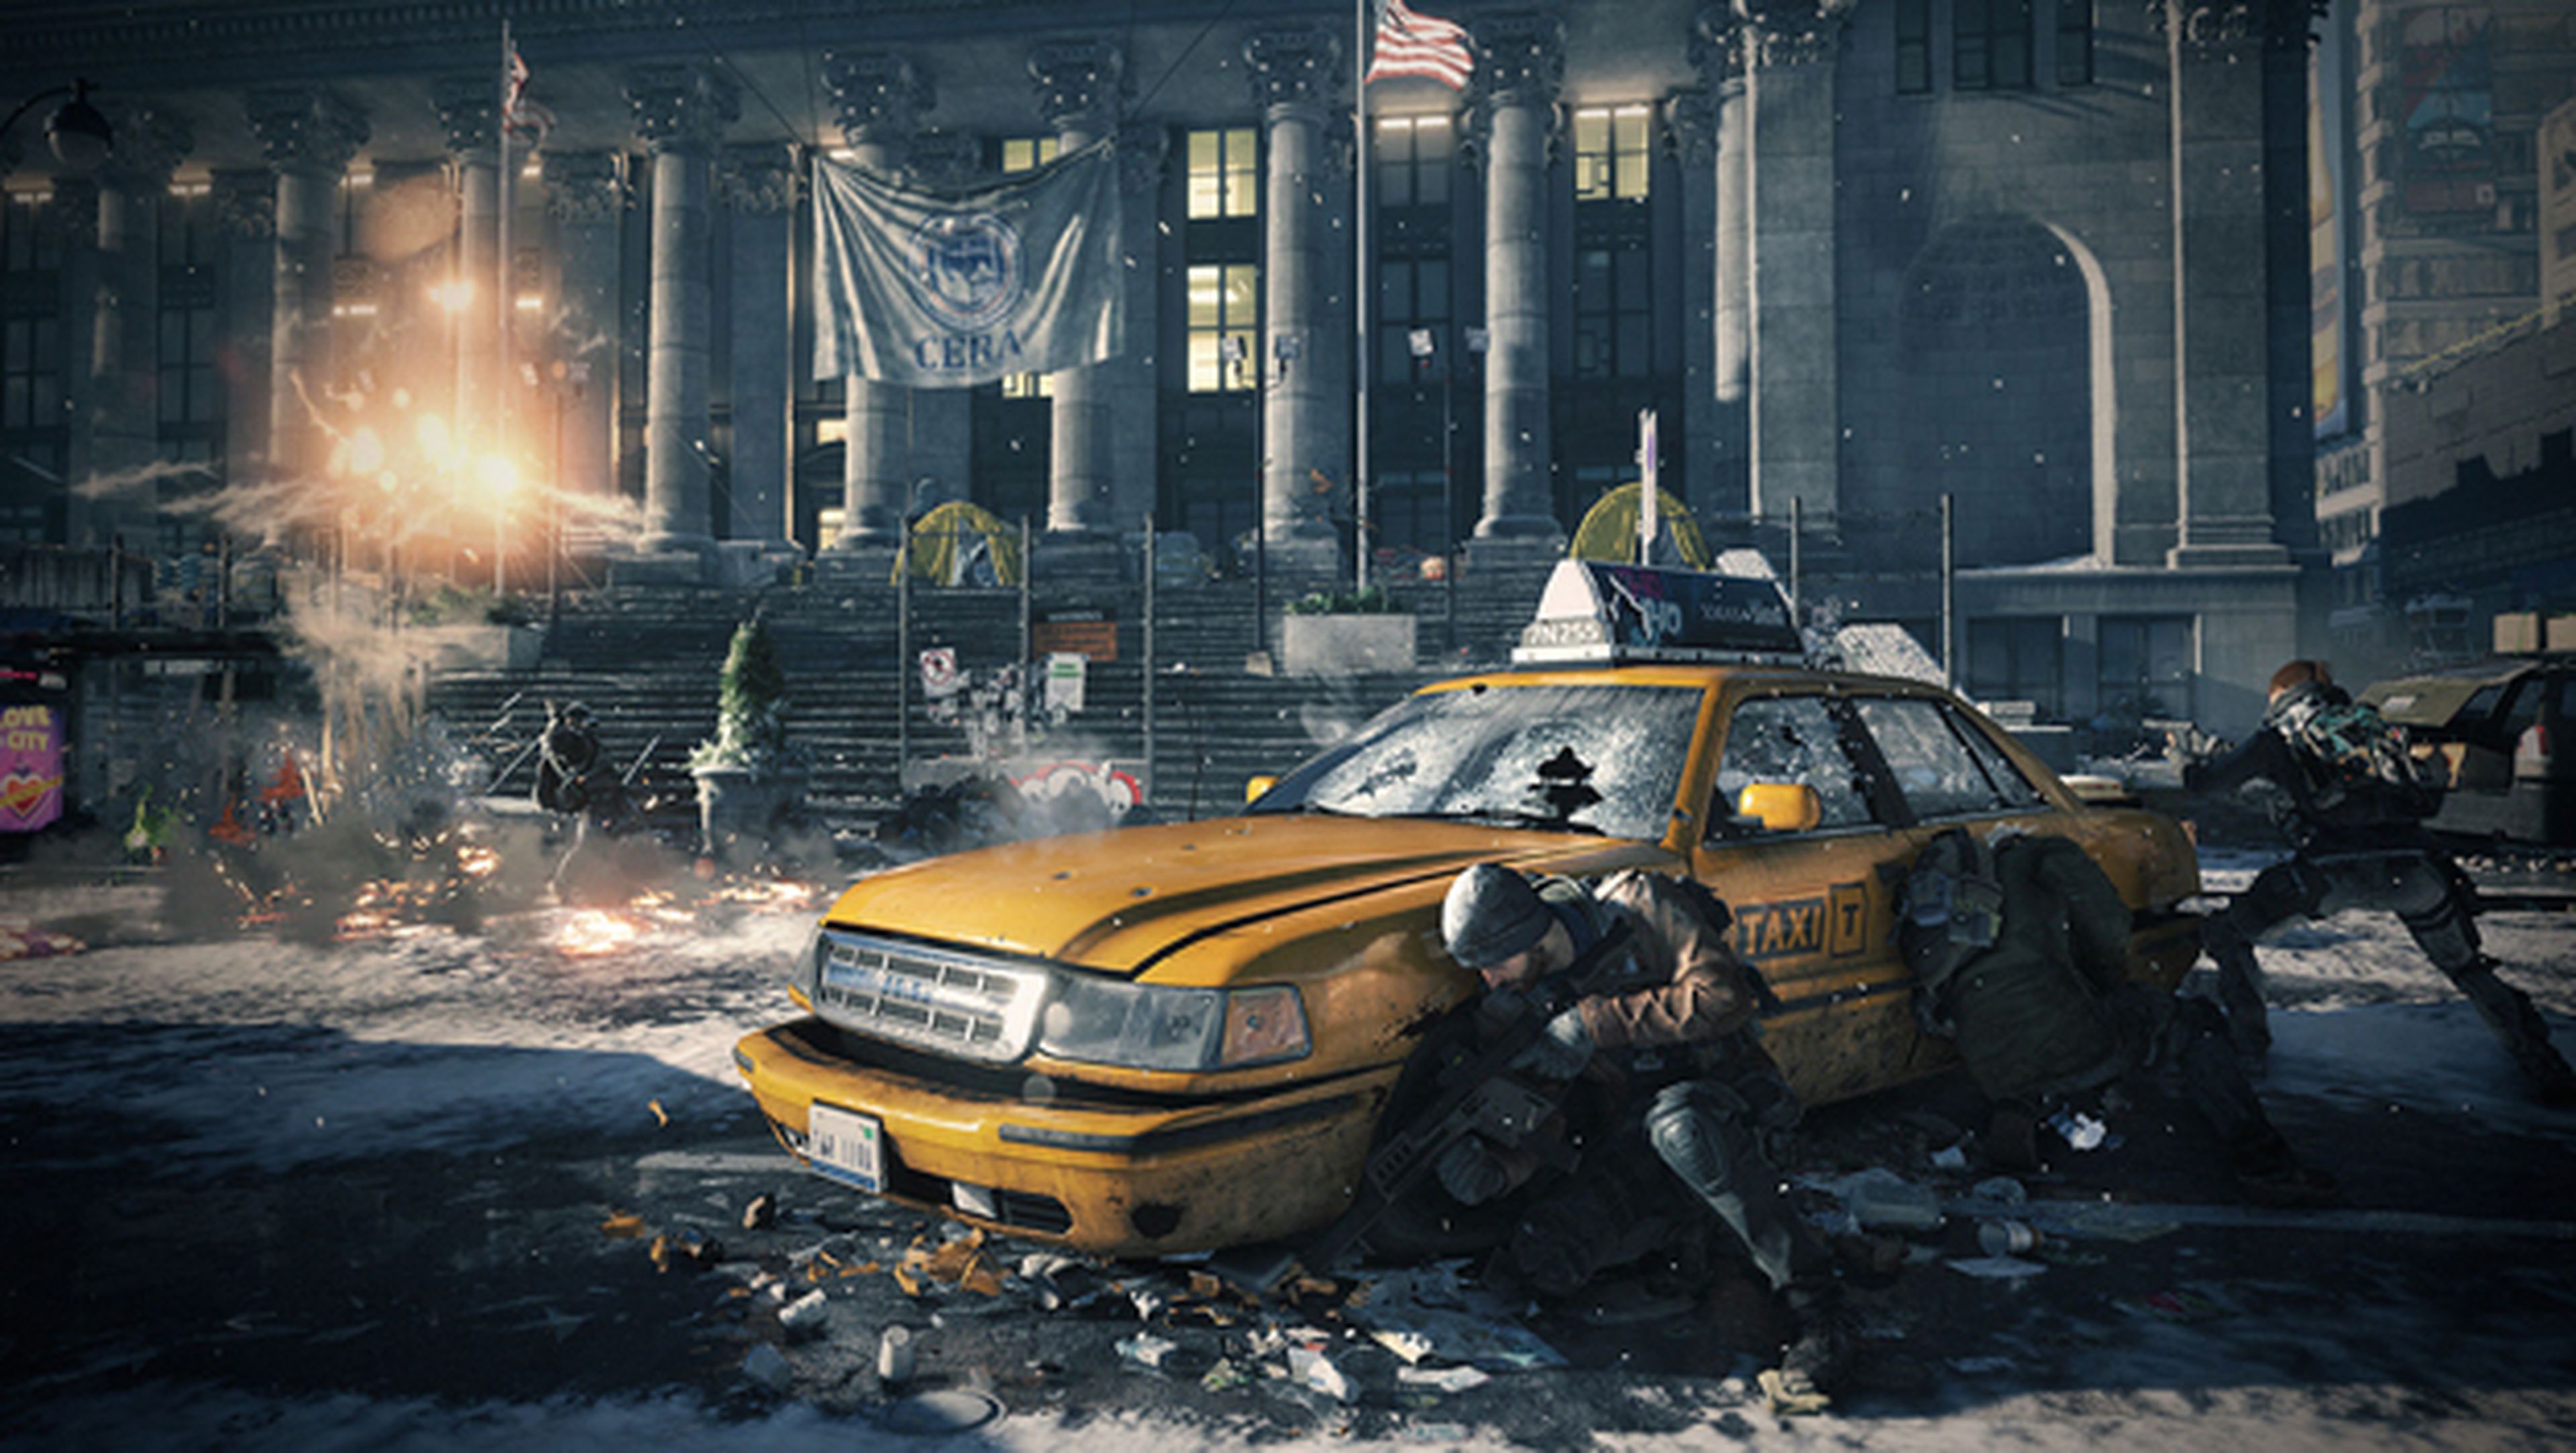 Tom Clancy´s The Division